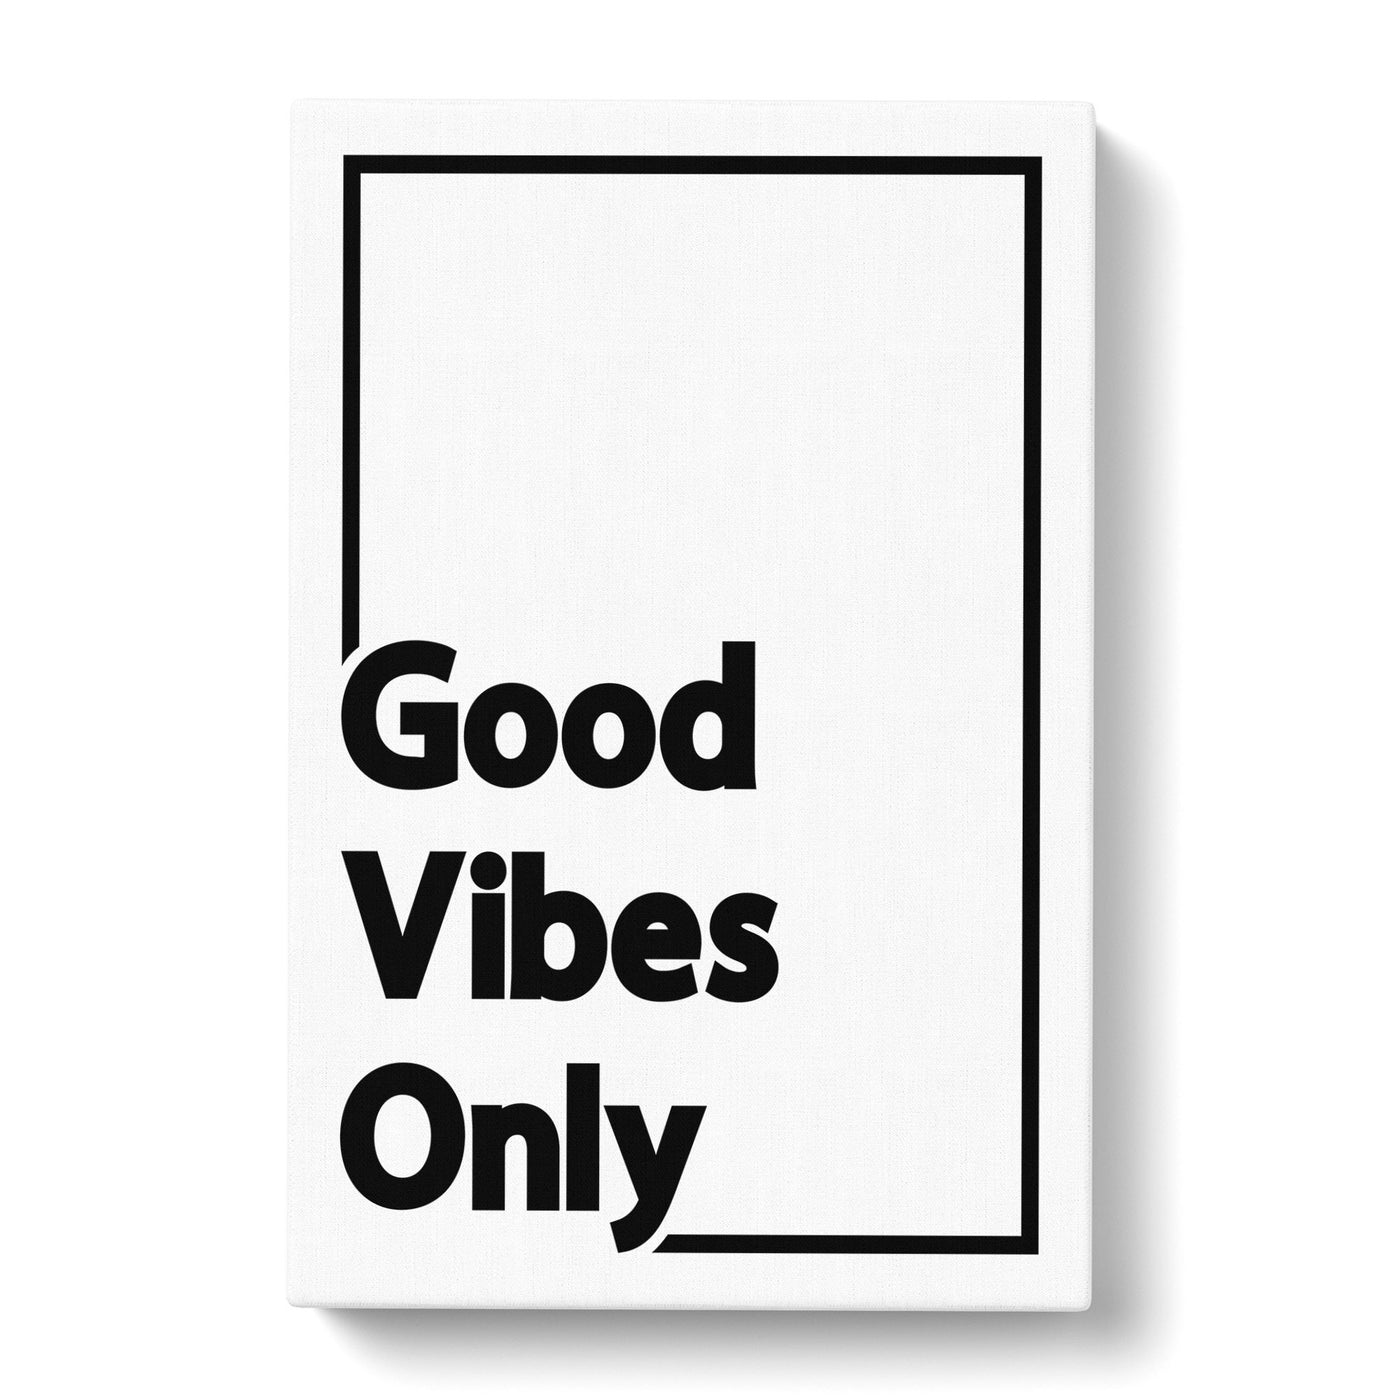 Good Vibes Only Black Border Typography Canvas Print Main Image